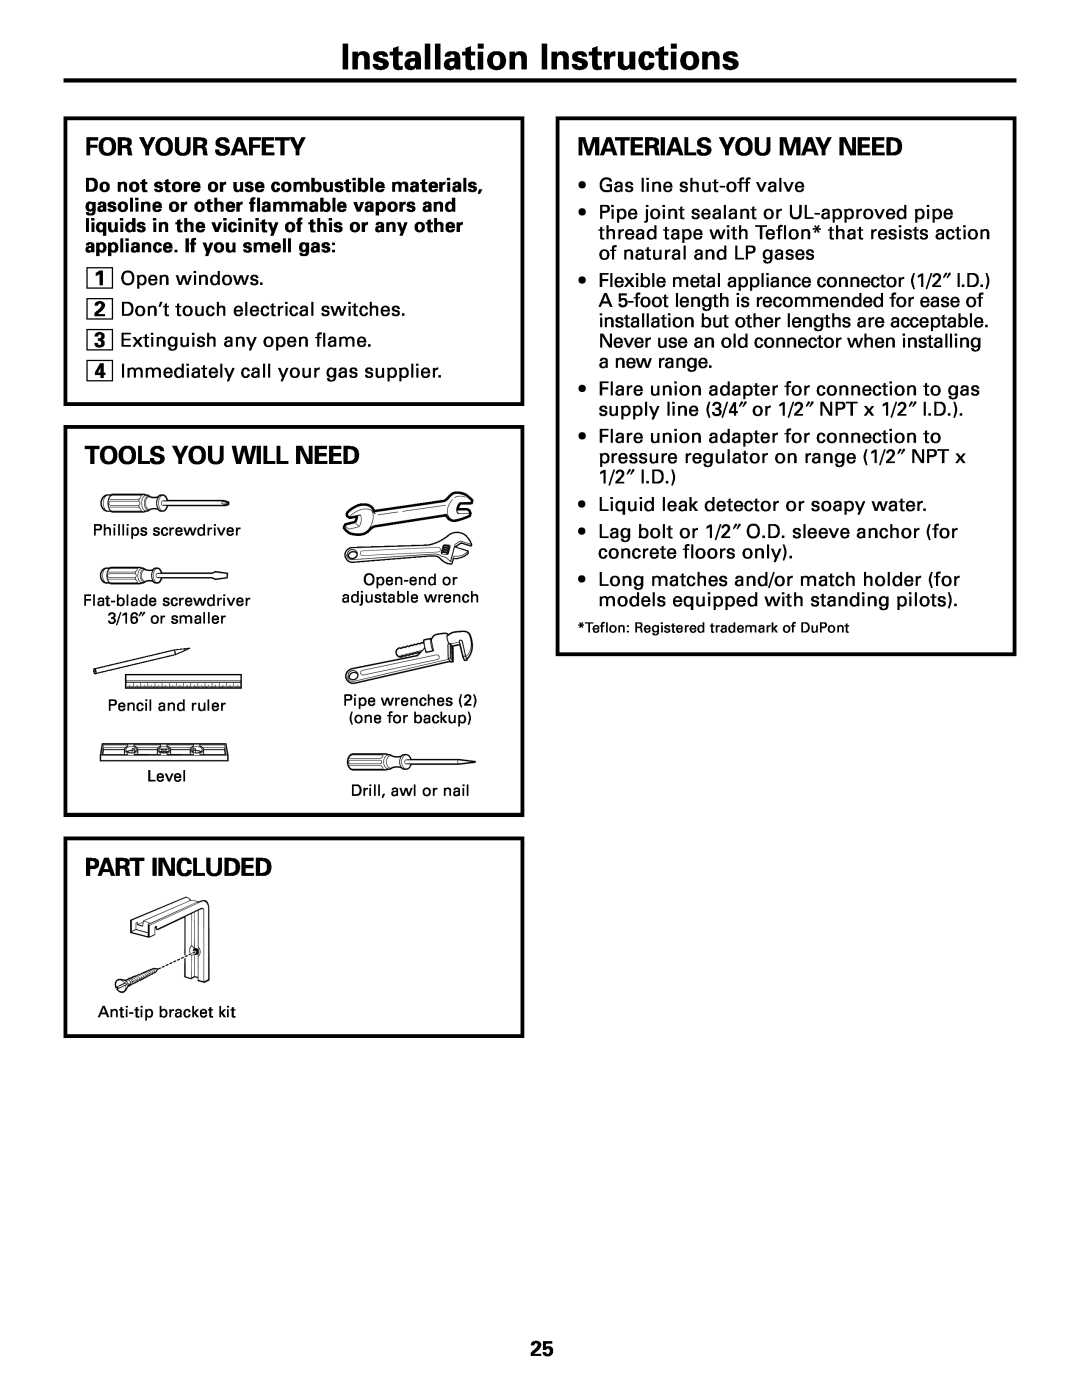 GE JGBC20 Installation Instructions, For Your Safety, Tools You Will Need, Part Included, Materials You May Need 